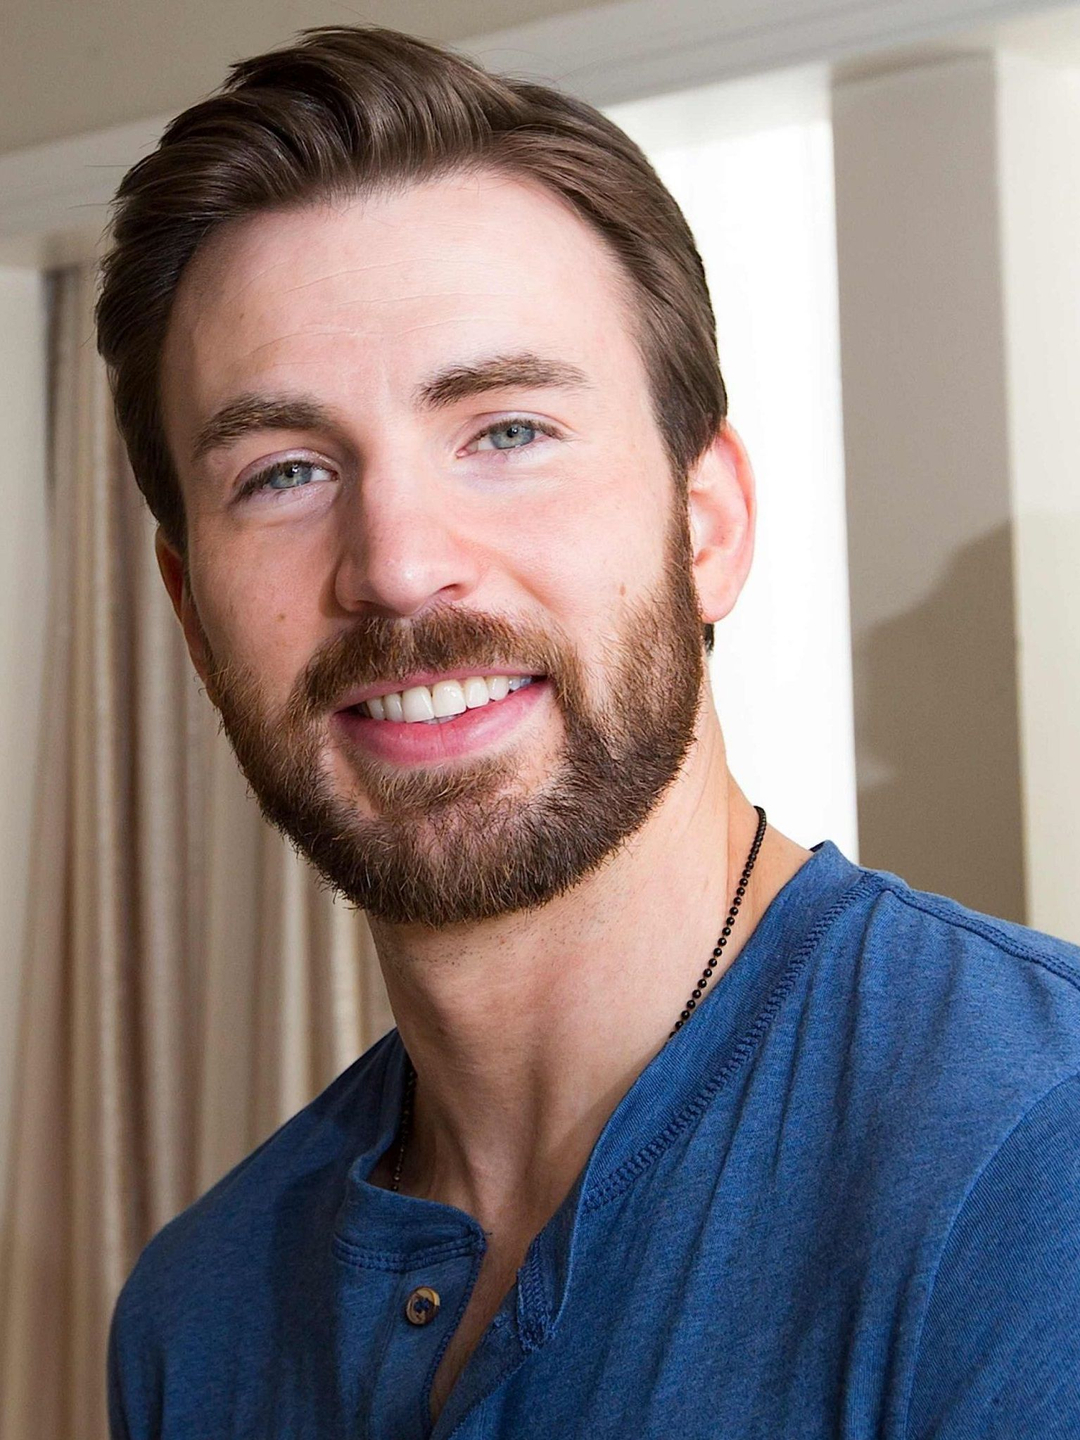 Chris Evans does he have a wife